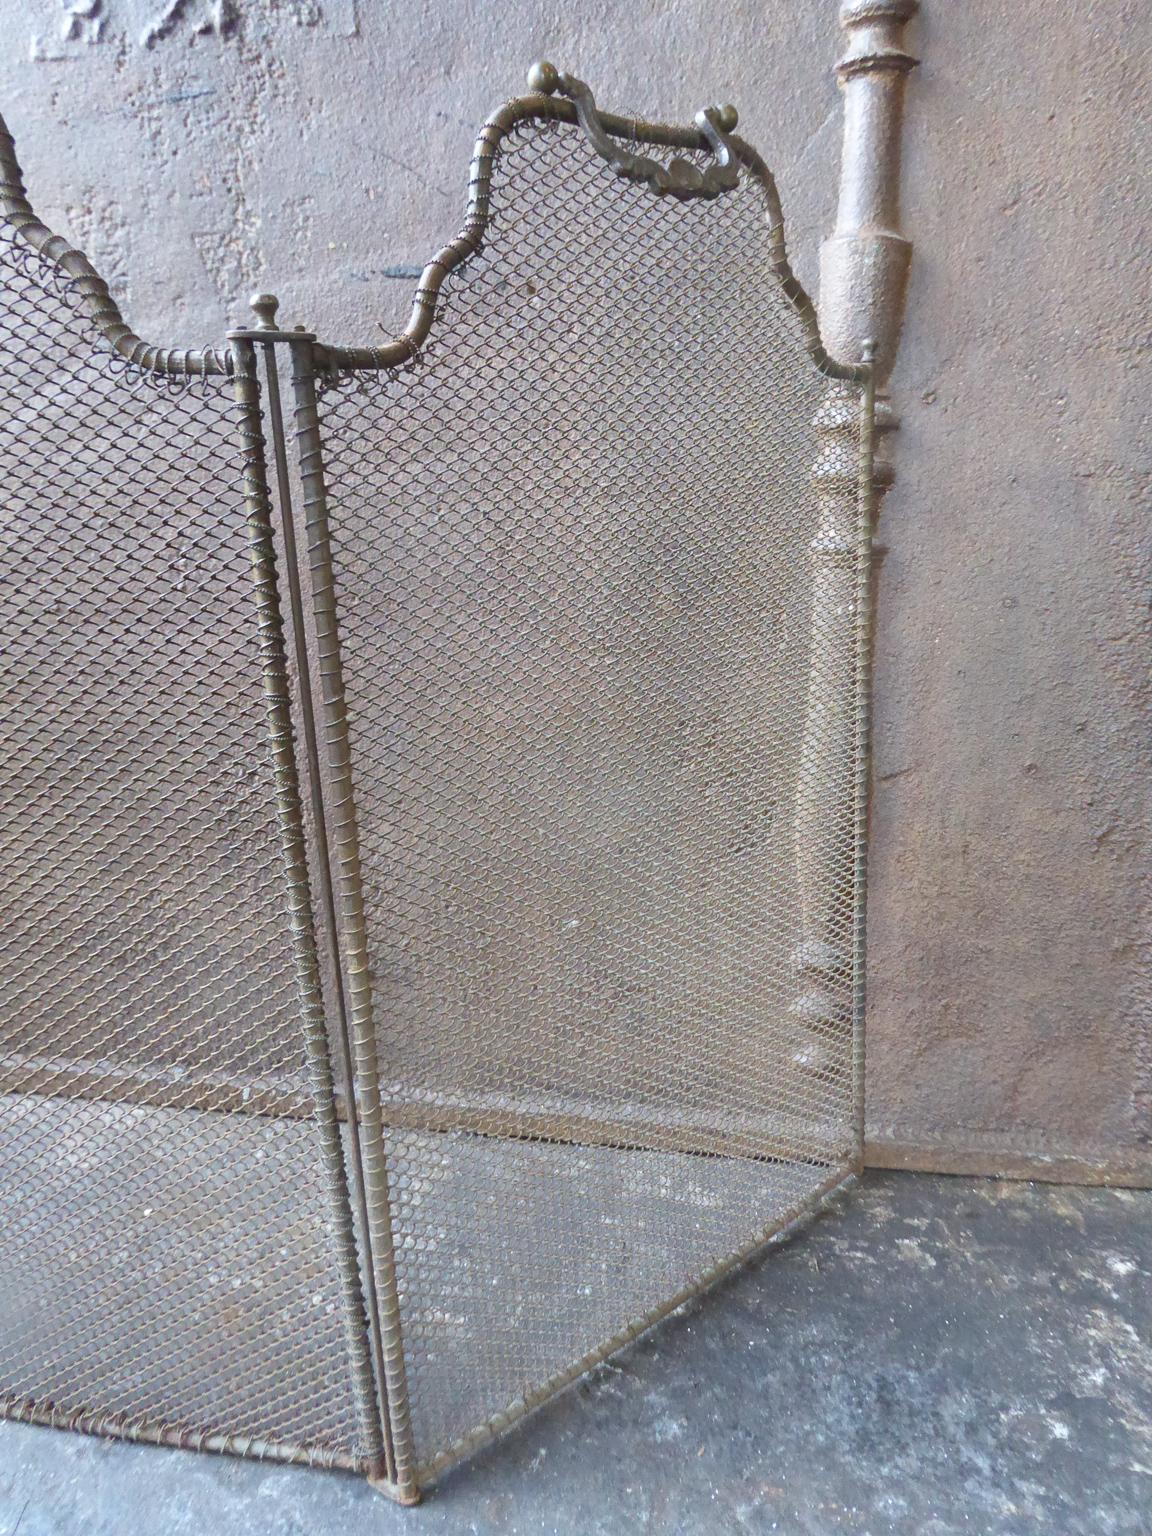 19th Century French Napoleon III Fireplace Screen or Fire Screen 1